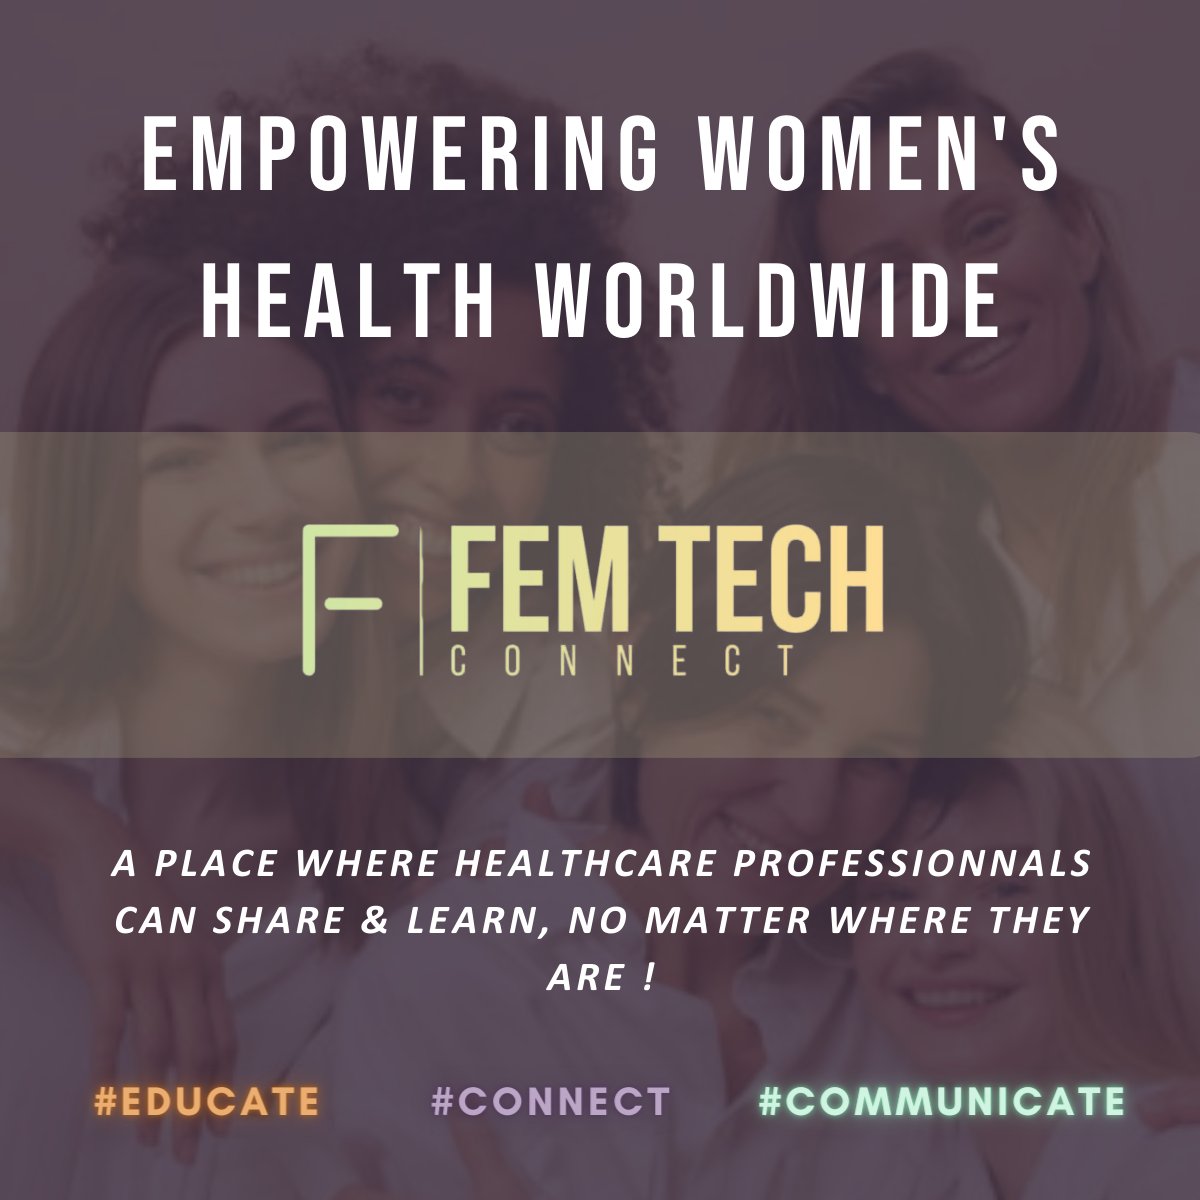 🌟 𝐄𝐥𝐞𝐯𝐚𝐭𝐢𝐧𝐠 𝐖𝐨𝐦𝐞𝐧'𝐬 𝐇𝐞𝐚𝐥𝐭𝐡 🌟 Our mission? To create a world where every woman receives the care and attention she deserves, where medical experiences are shared, knowledge is exchanged, and innovative solutions flourish. 💡